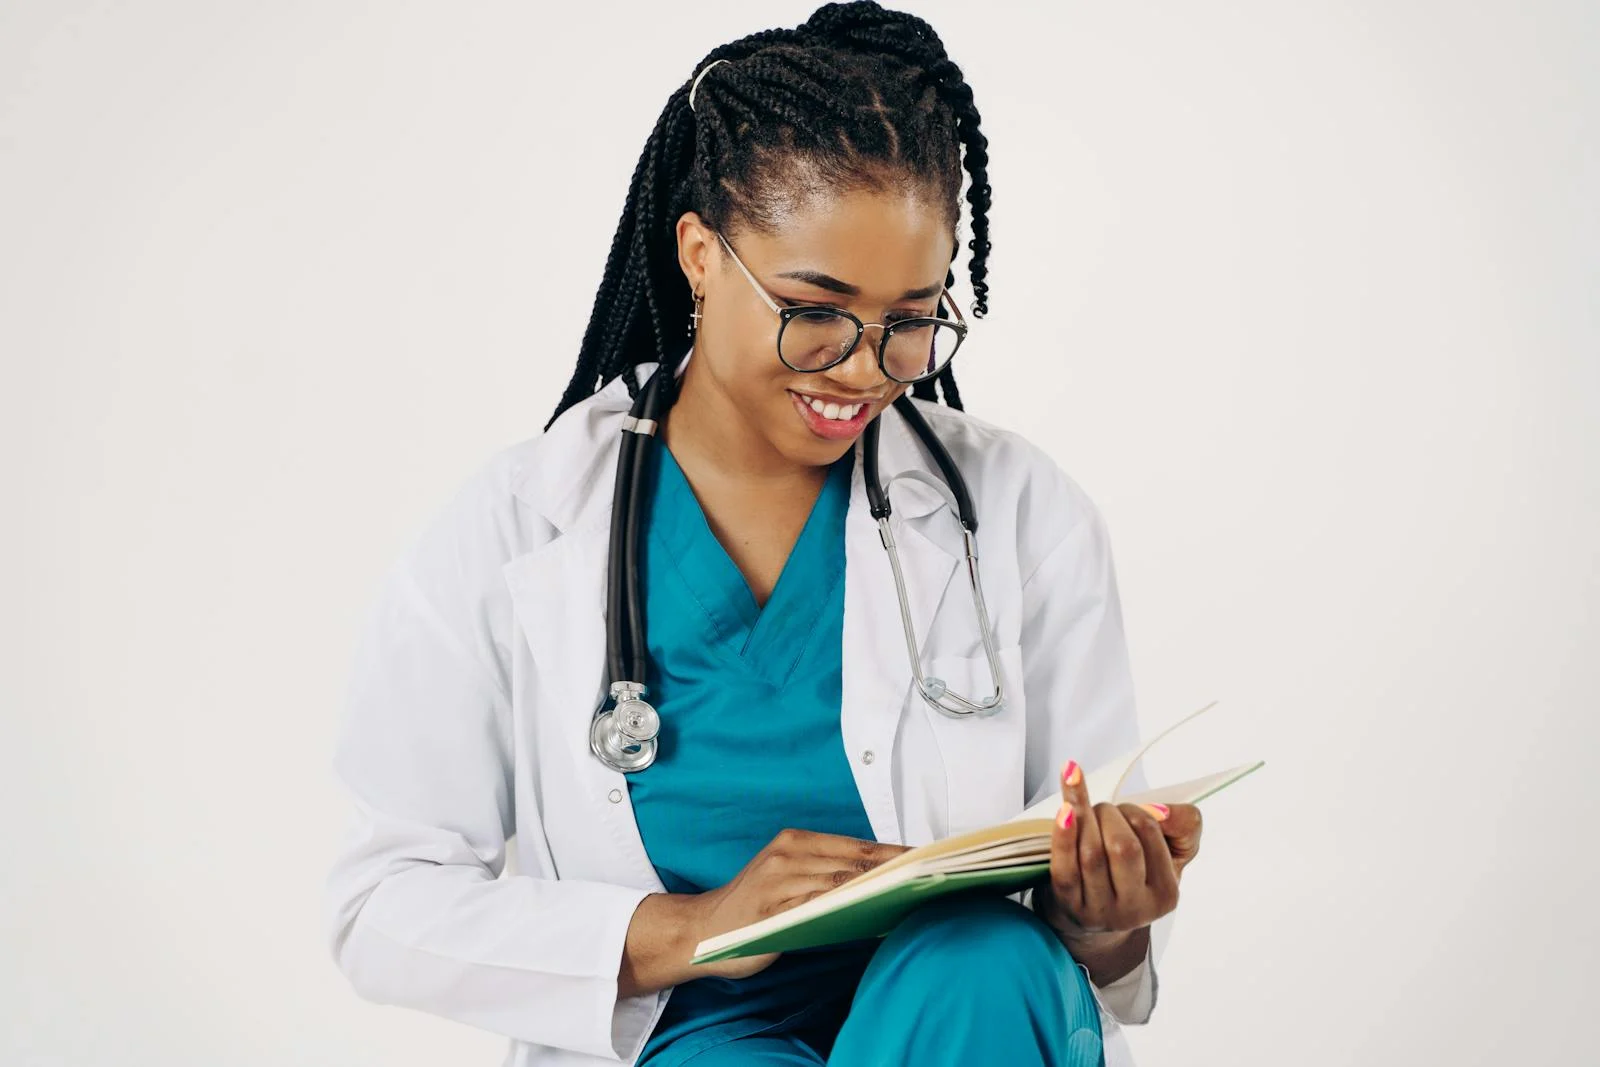 Black doctor in uniform with braids and glasses sitting and smiling at a book - 10 Healthcare Jobs You Should Know About 